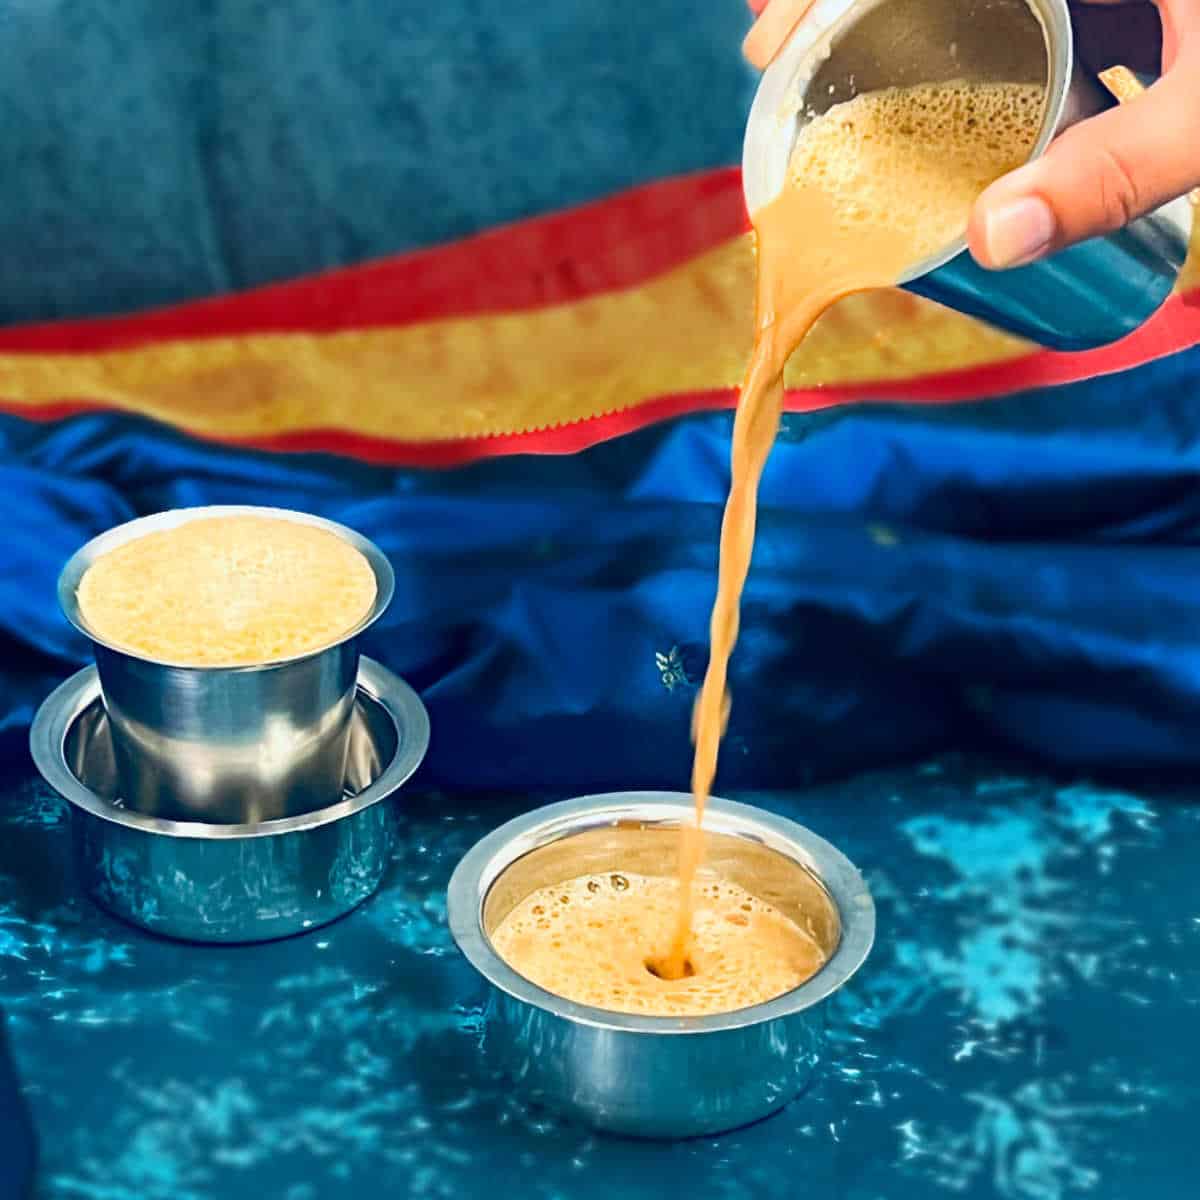 A step showing how to pull the coffee.